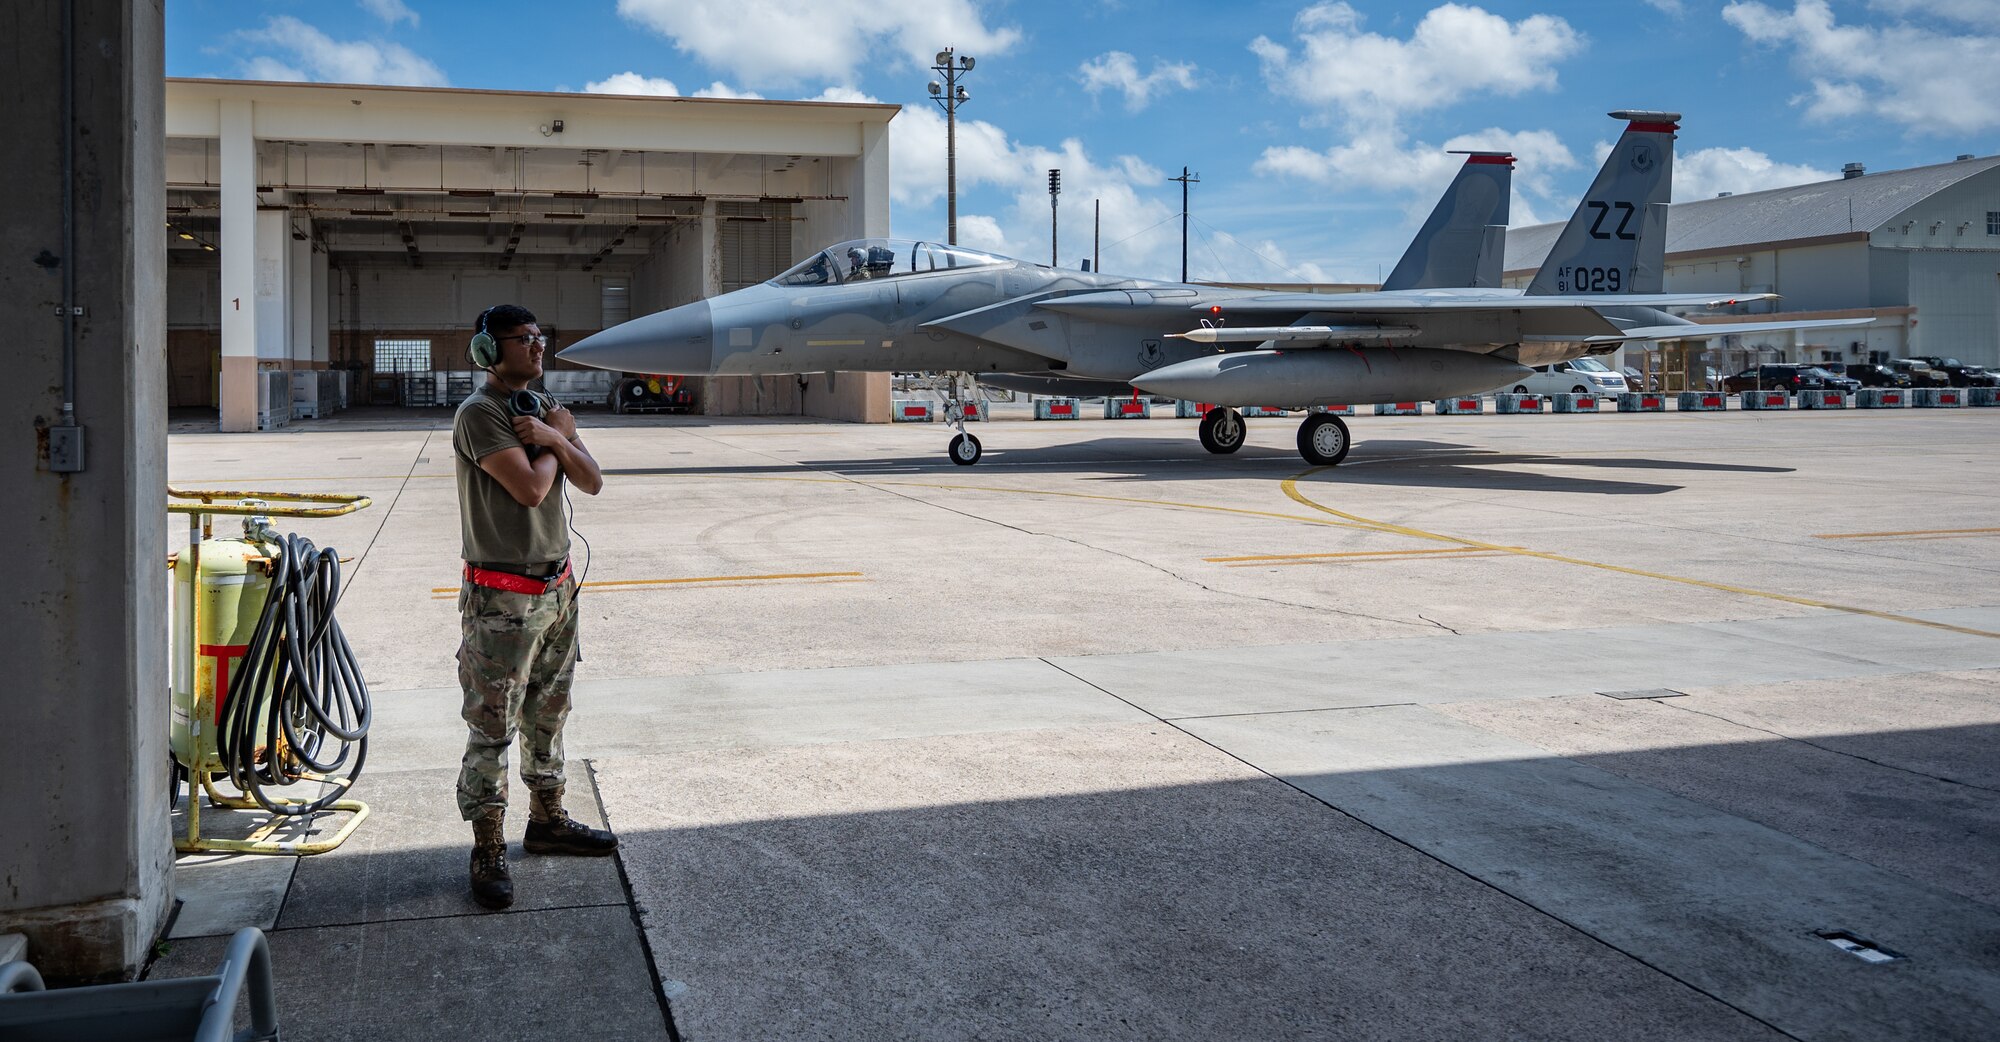 U.S. Air Force Airman 1st Class Joel Hernandez, 67th Aircraft Maintenance Unit crew chief, signals to the pilot of an F-15C Eagle at Kadena Air Base, Japan, Sept. 14, 2021. The life of a dedicated crew chief requires non-stop dedication, day and night, to maintain air-to-air combat superiority. (U.S. Air Force photo by Airman 1st Class Stephen Pulter)